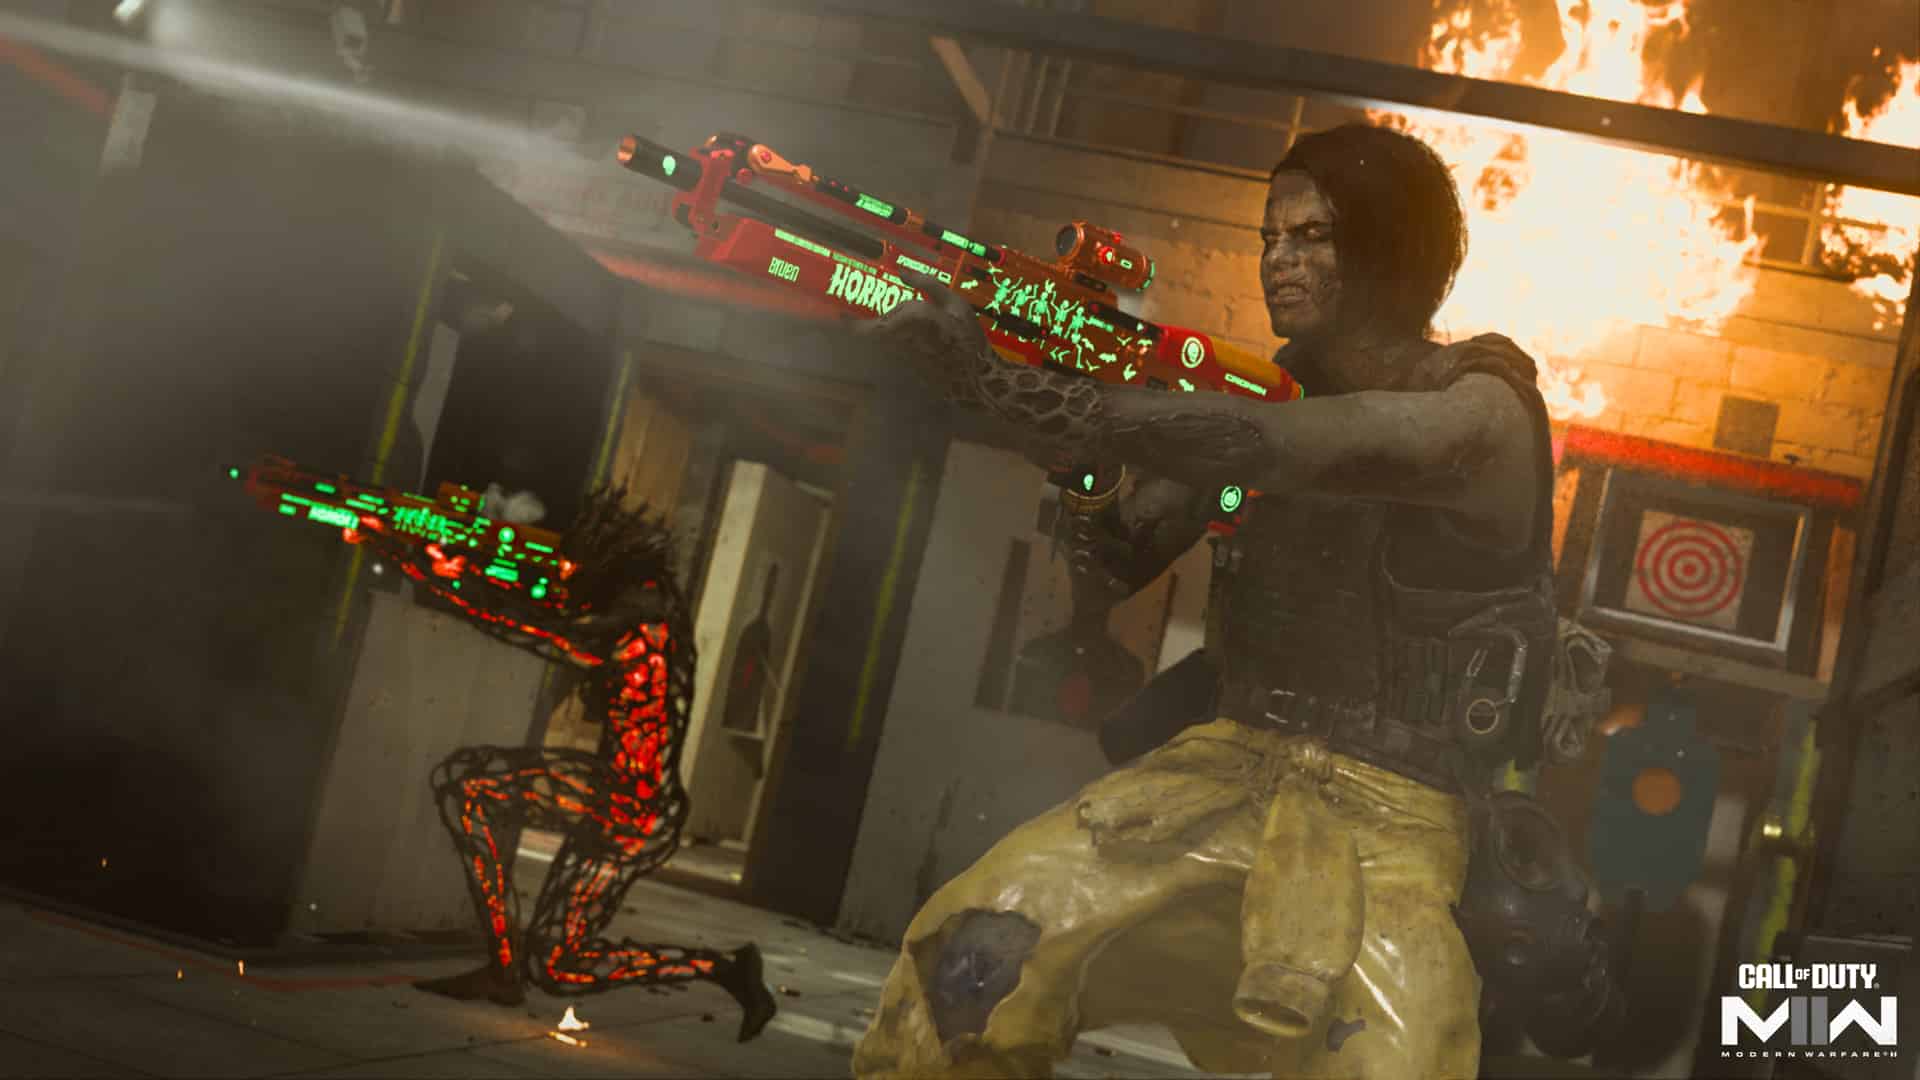 A man is holding a gun in a Warzone video game.